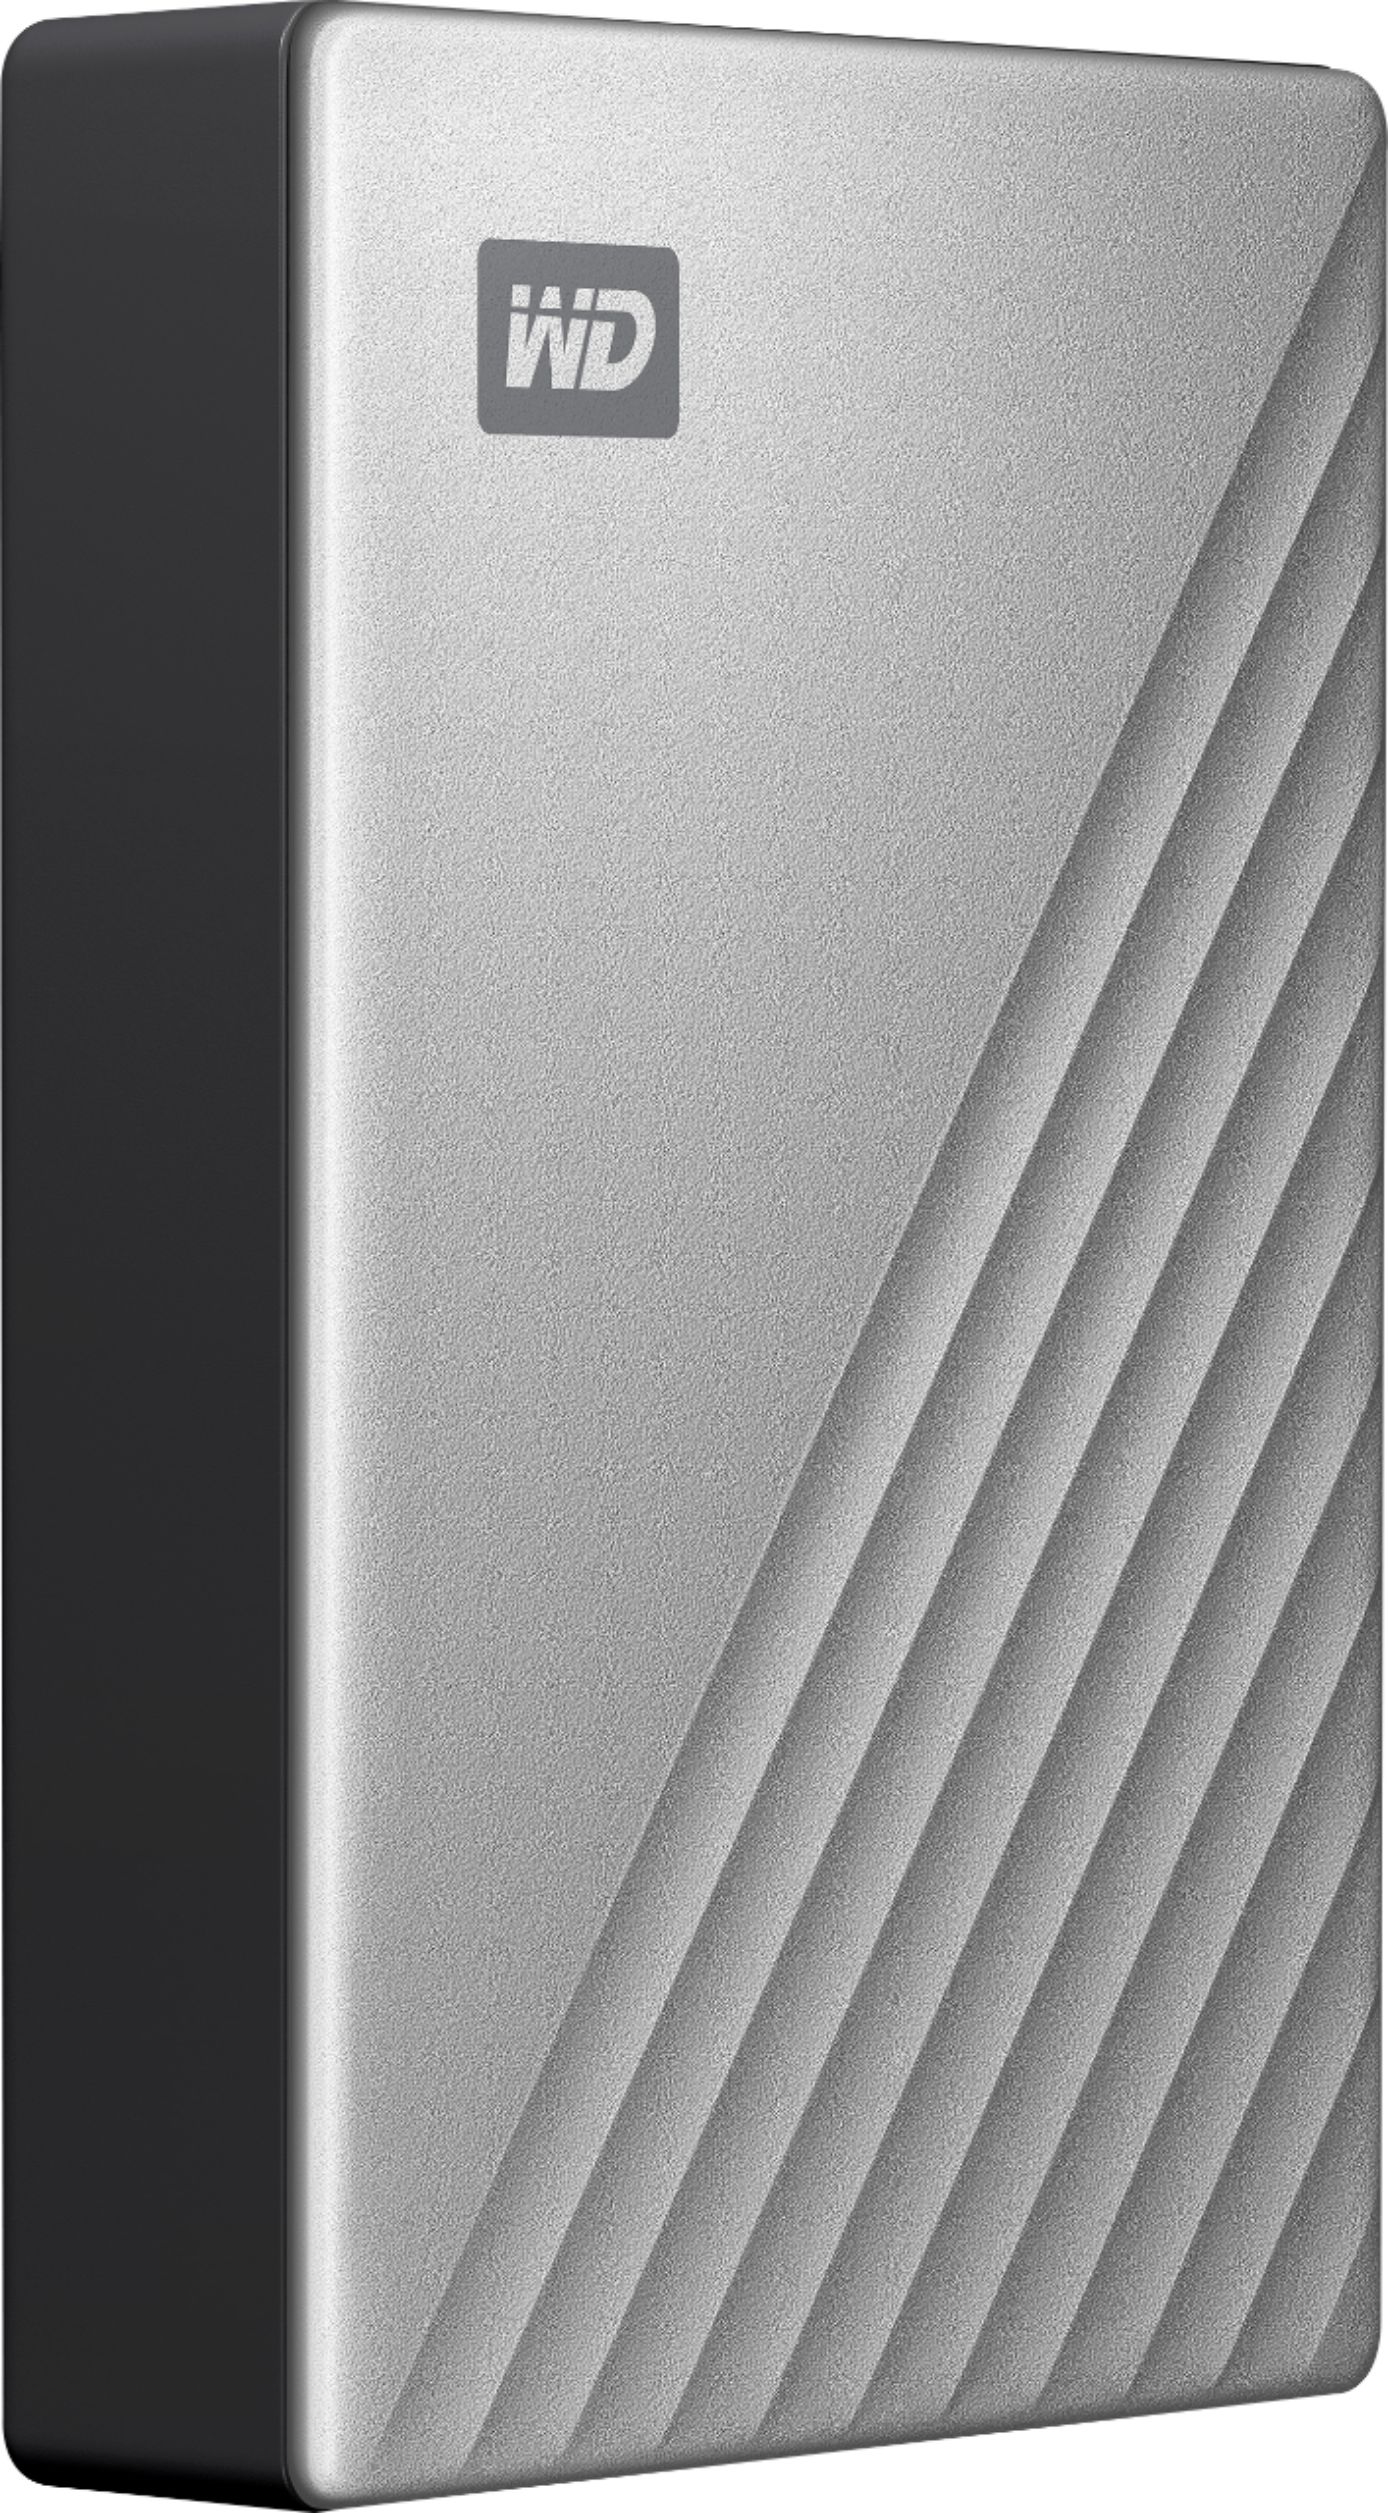 Angle View: WD - My Passport Ultra for Mac 4TB External USB 3.0 Portable Hard Drive - Silver